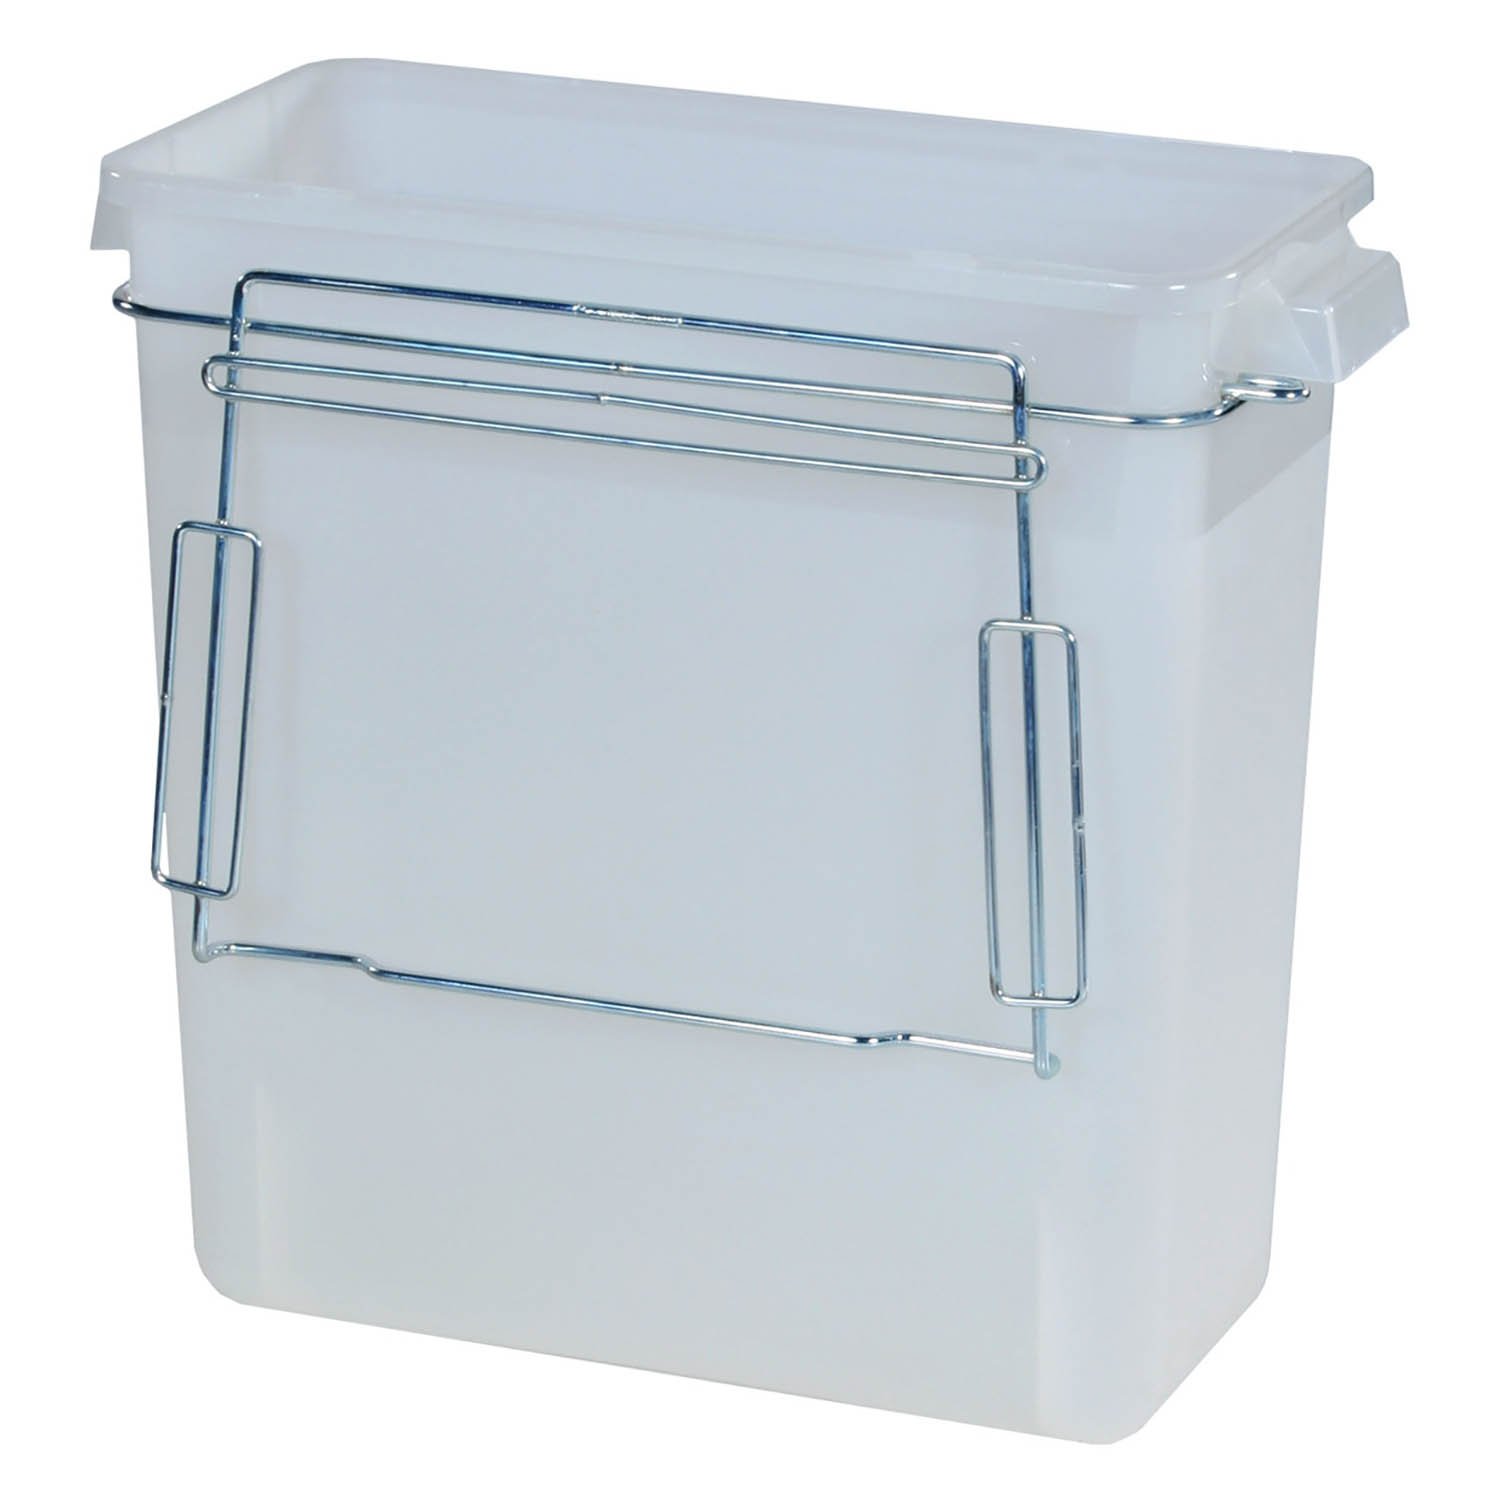 https://www.universalmedicalinc.com/media/catalog/product/cache/396fa530d5fa12bef36f4c19de24af0a/6/8/684801_three-gallon-plastic-waste-container-mounting-bracket-without-cover_5.jpg